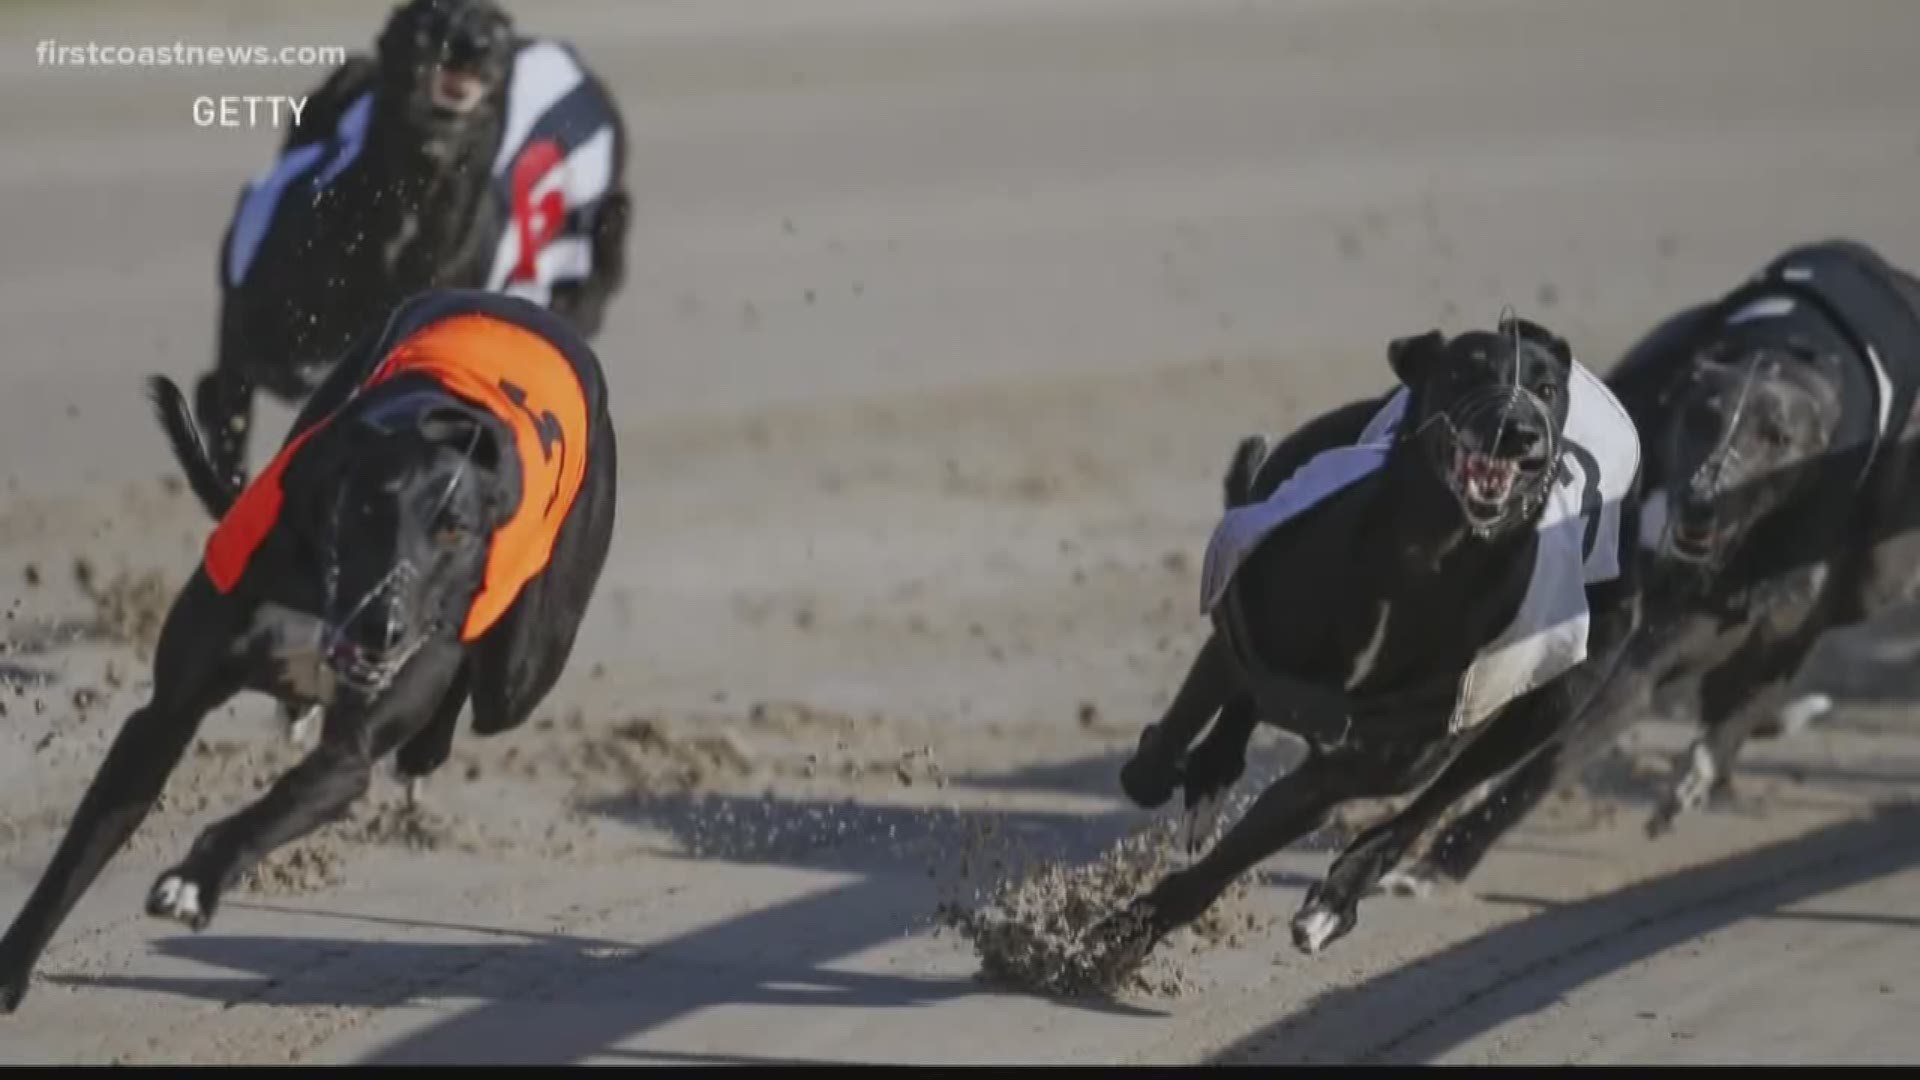 The future of greyhound racing is voters' hands.